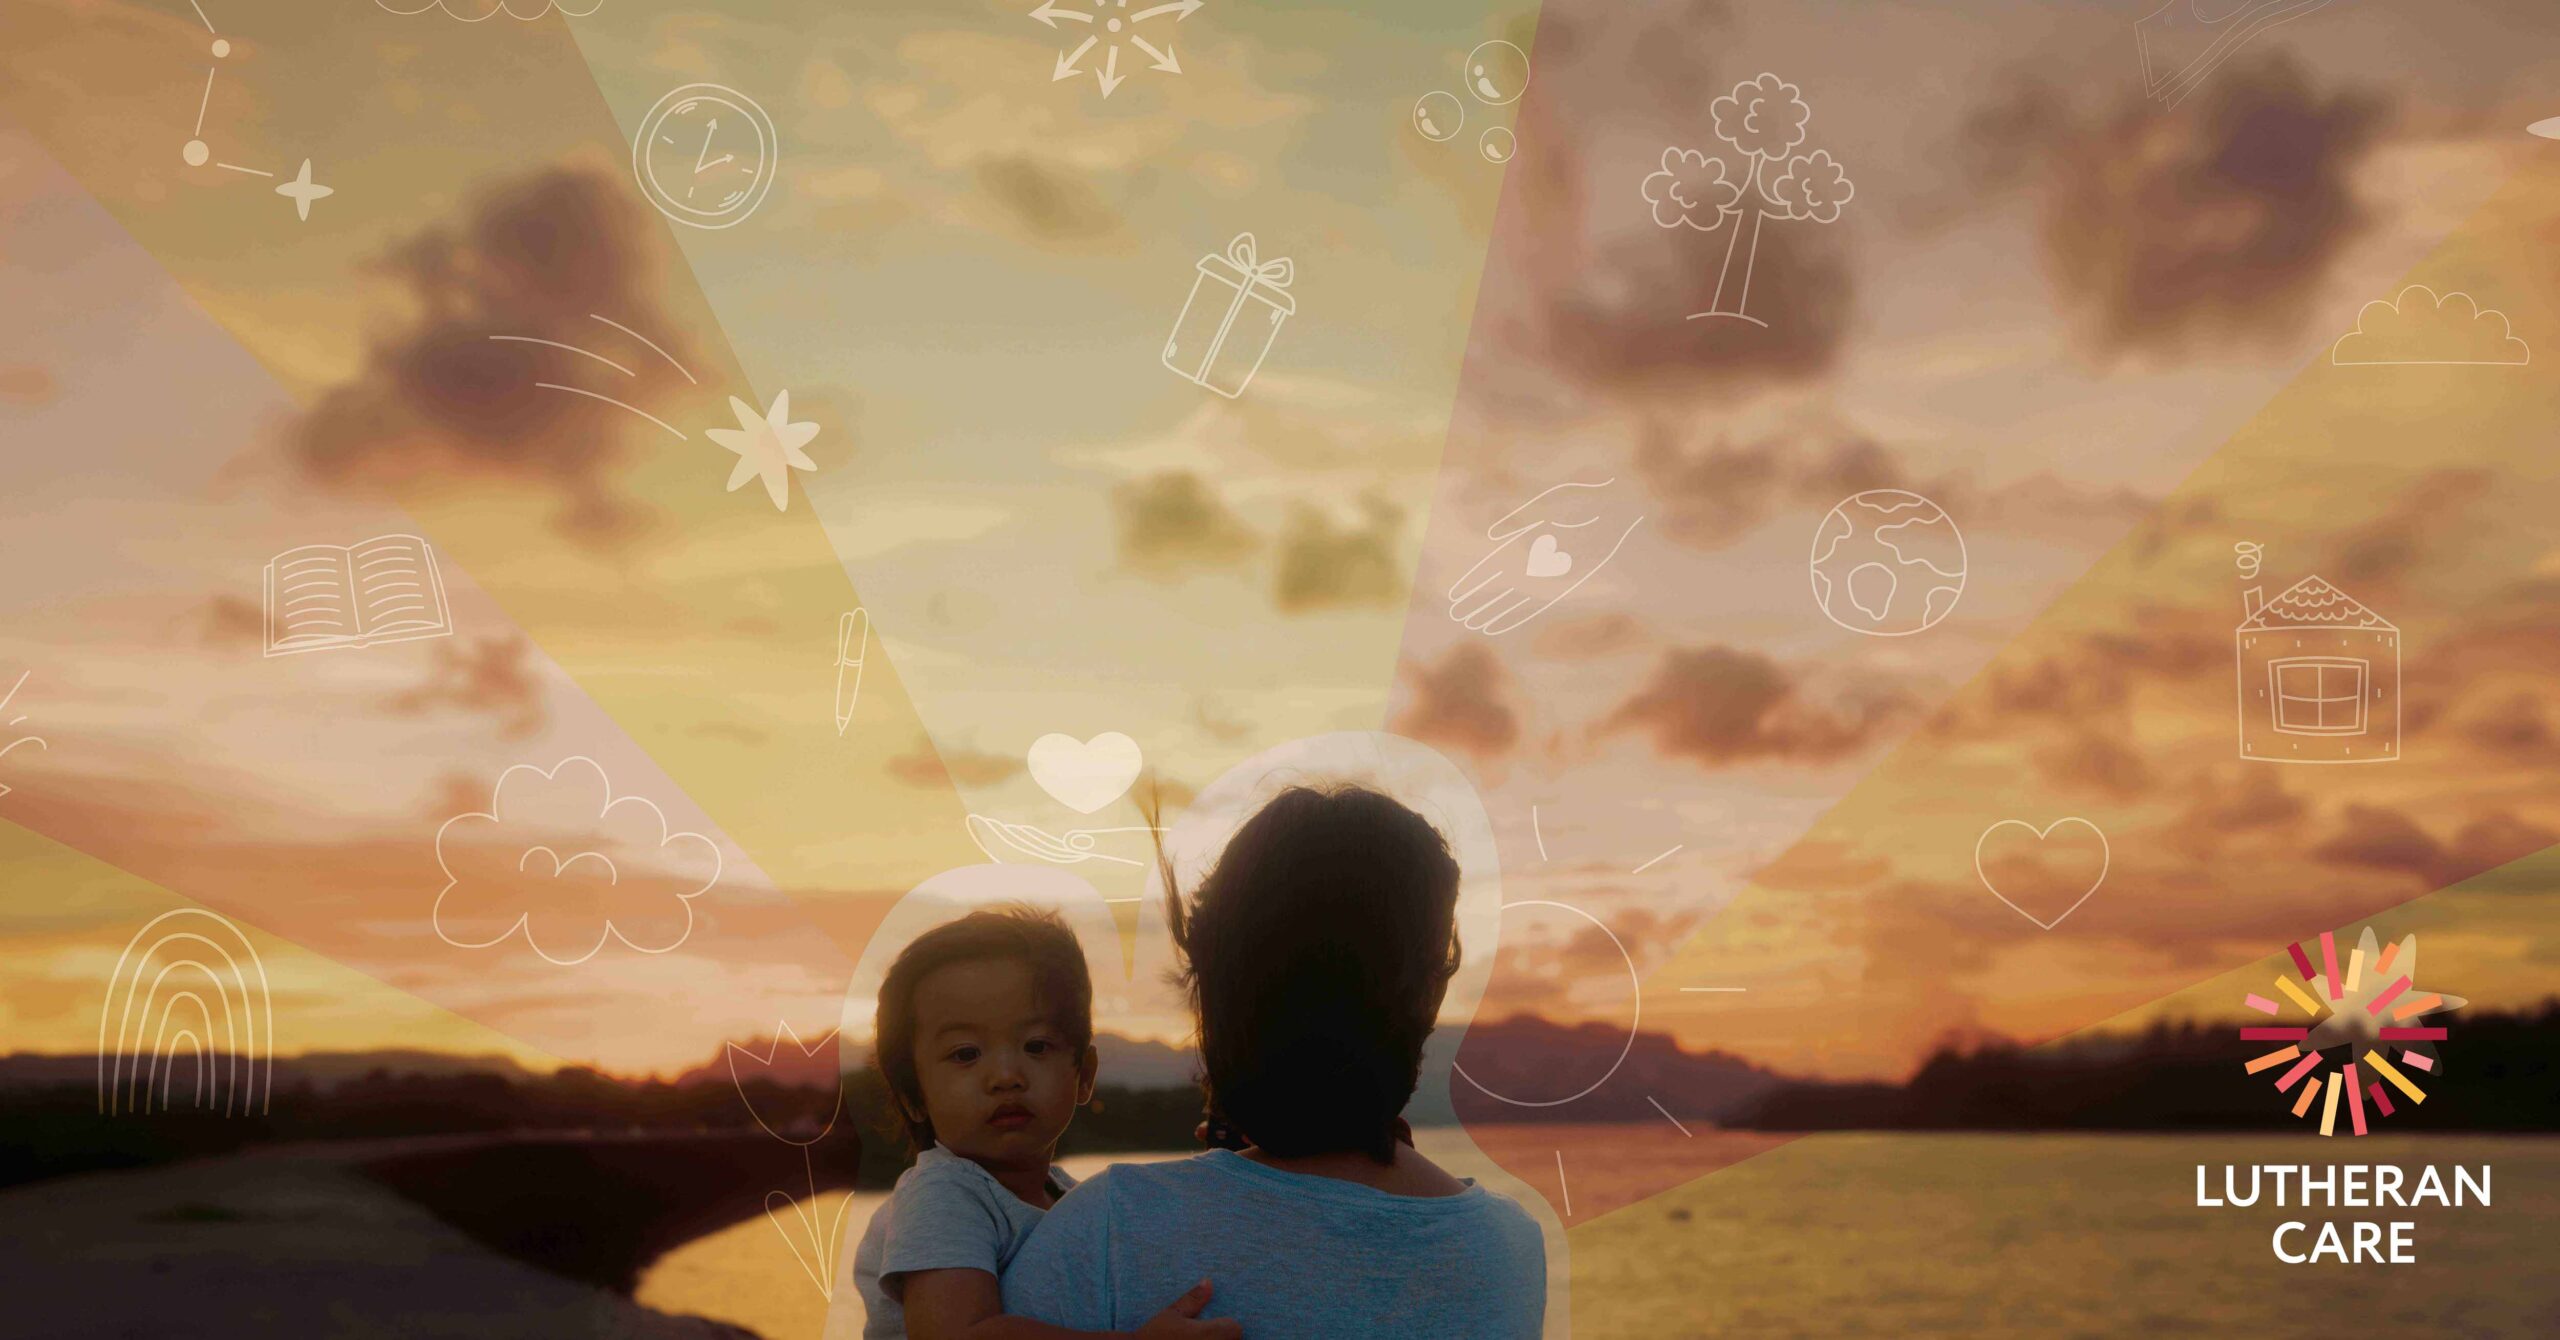 A woman and her child watch the sunrise over a lake. The Lutheran Care logo appears in the bottom right hand corner.